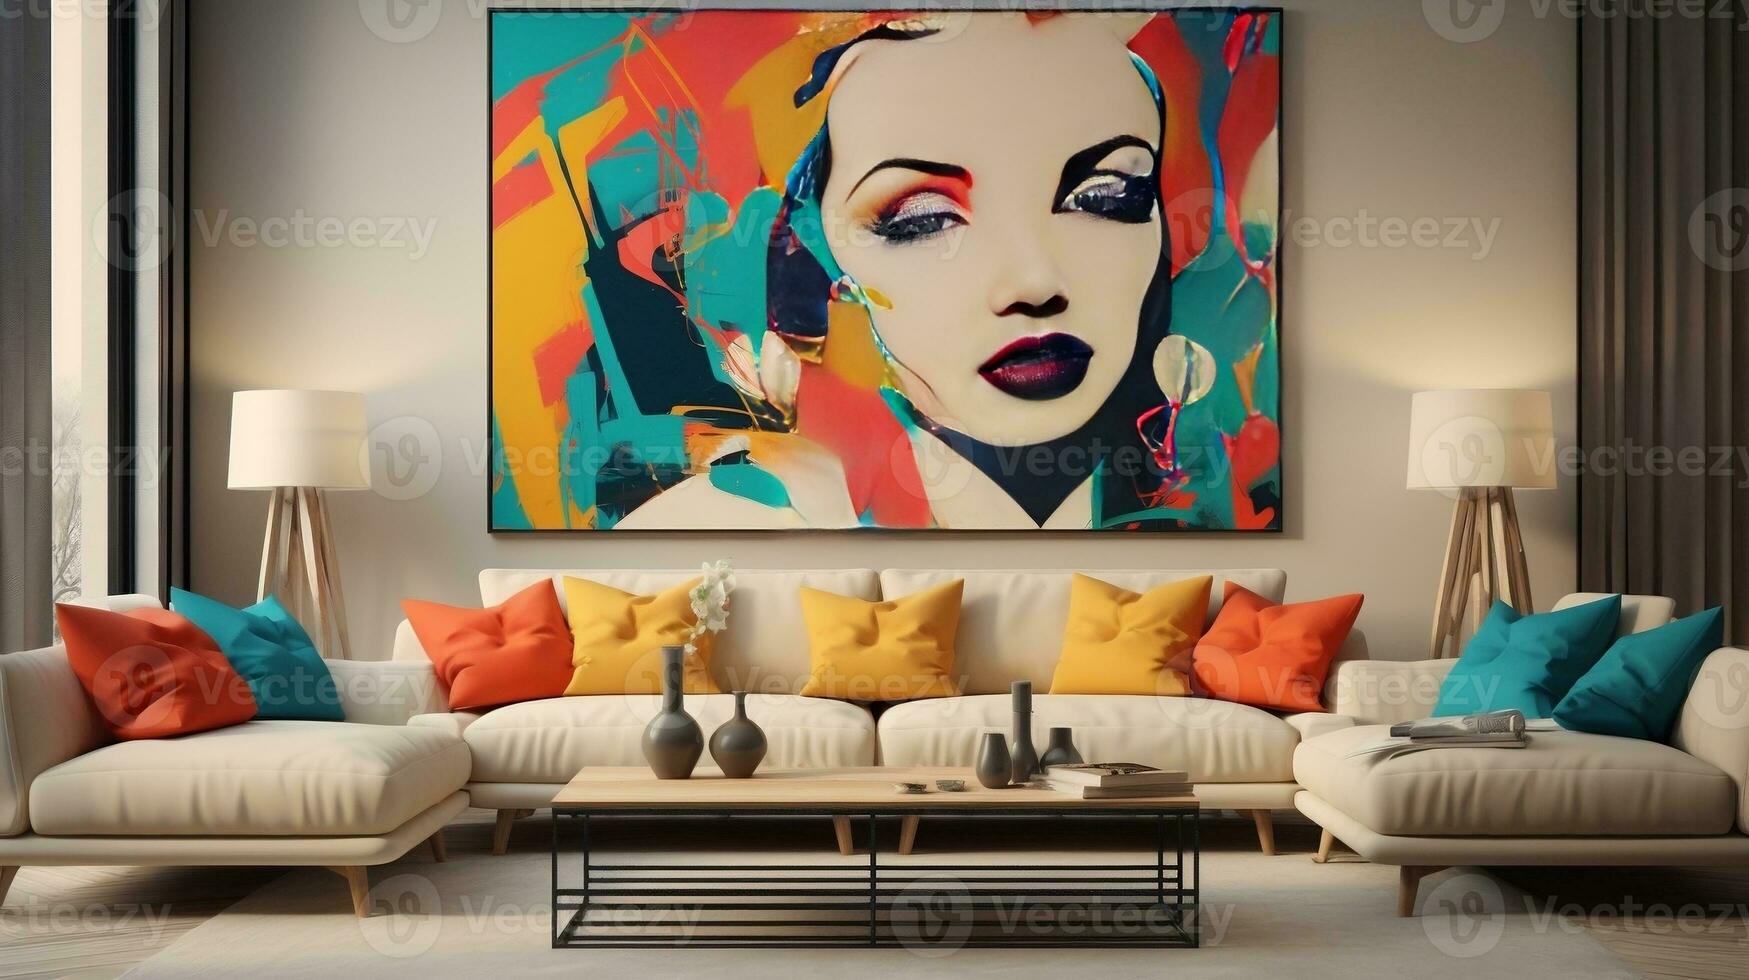 Pop art style interior design of the modern living room with two beige ...